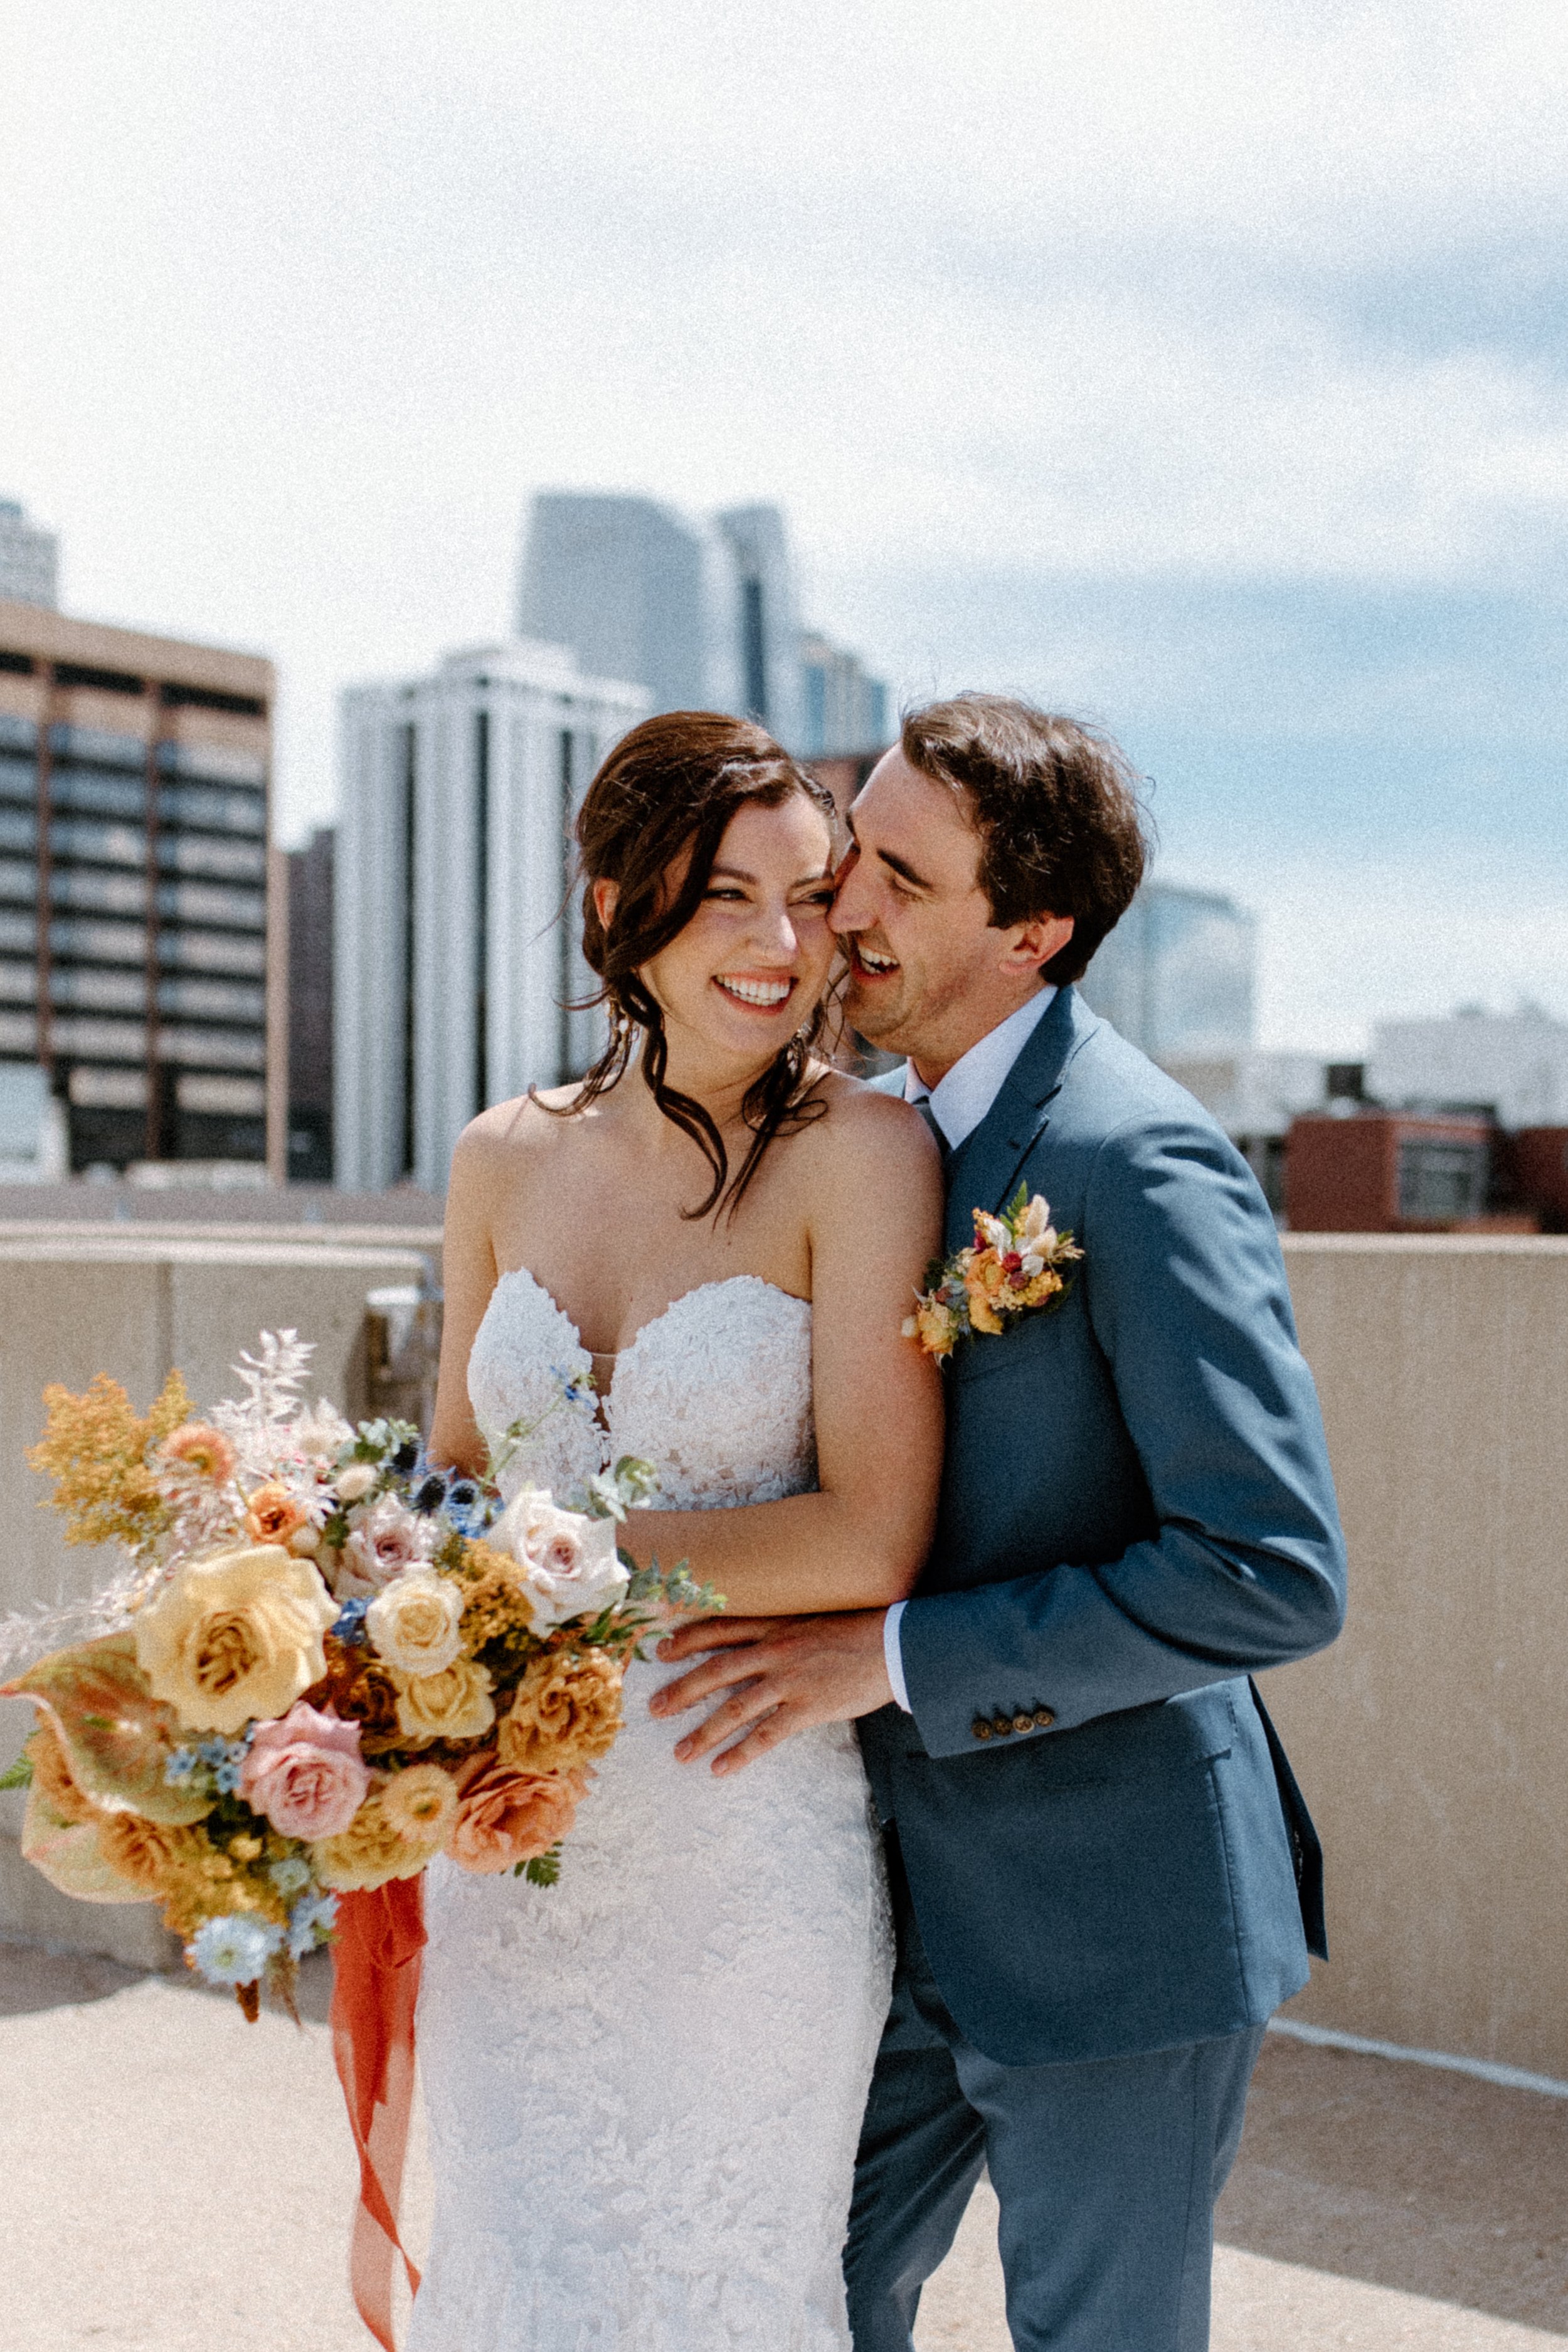 bride and groom photos on top of a parking garage for wedding reception ideas